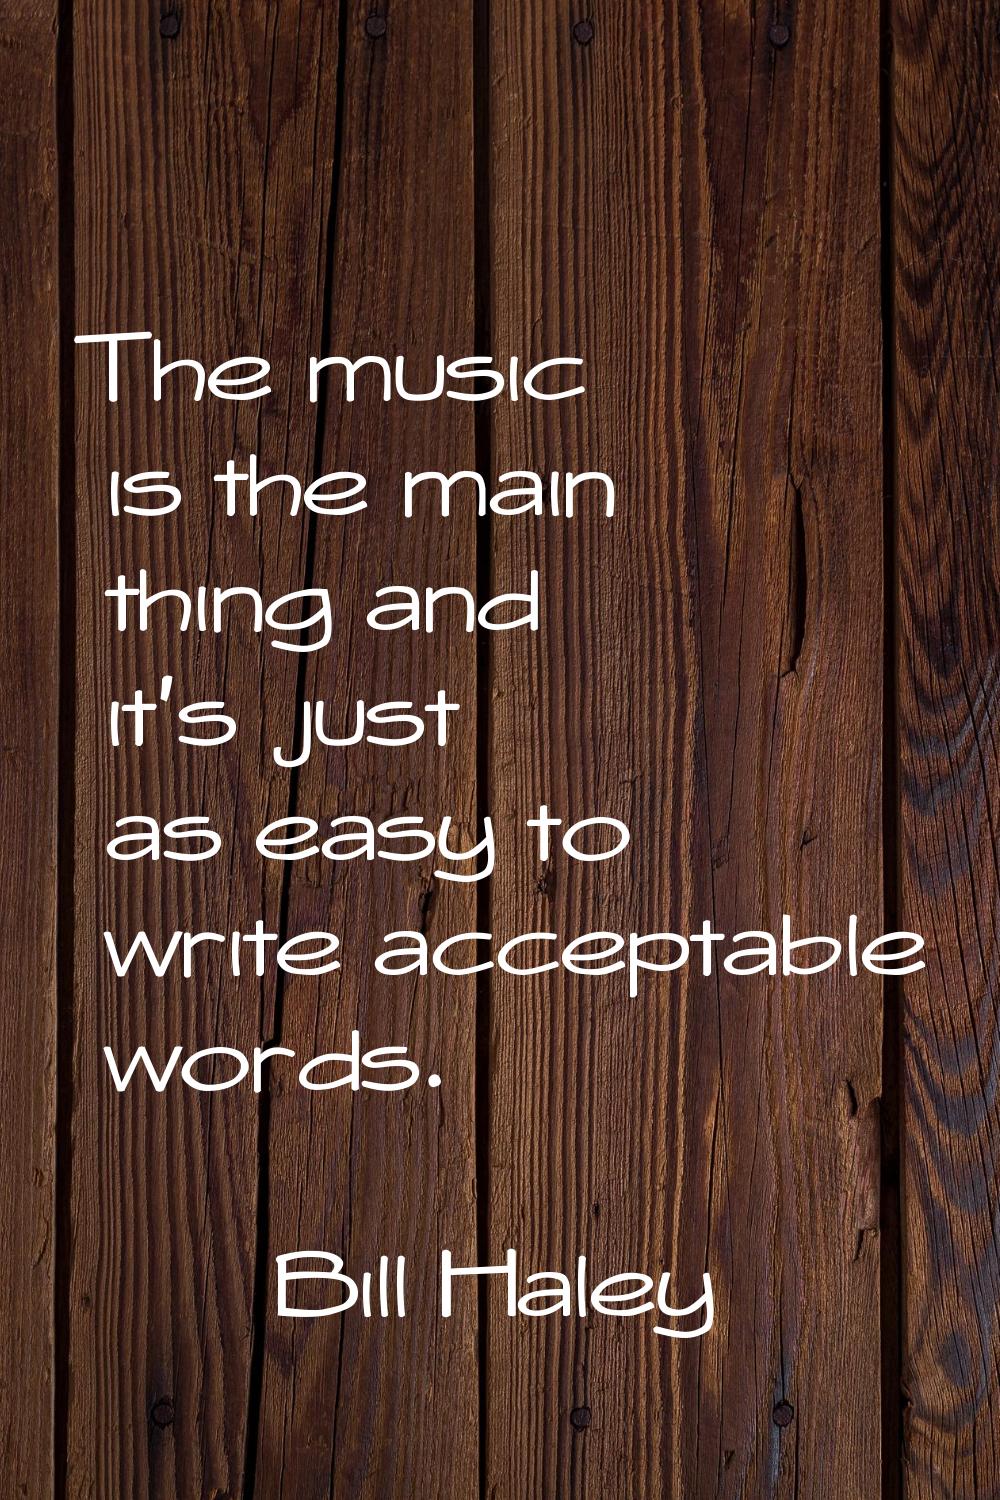 The music is the main thing and it's just as easy to write acceptable words.